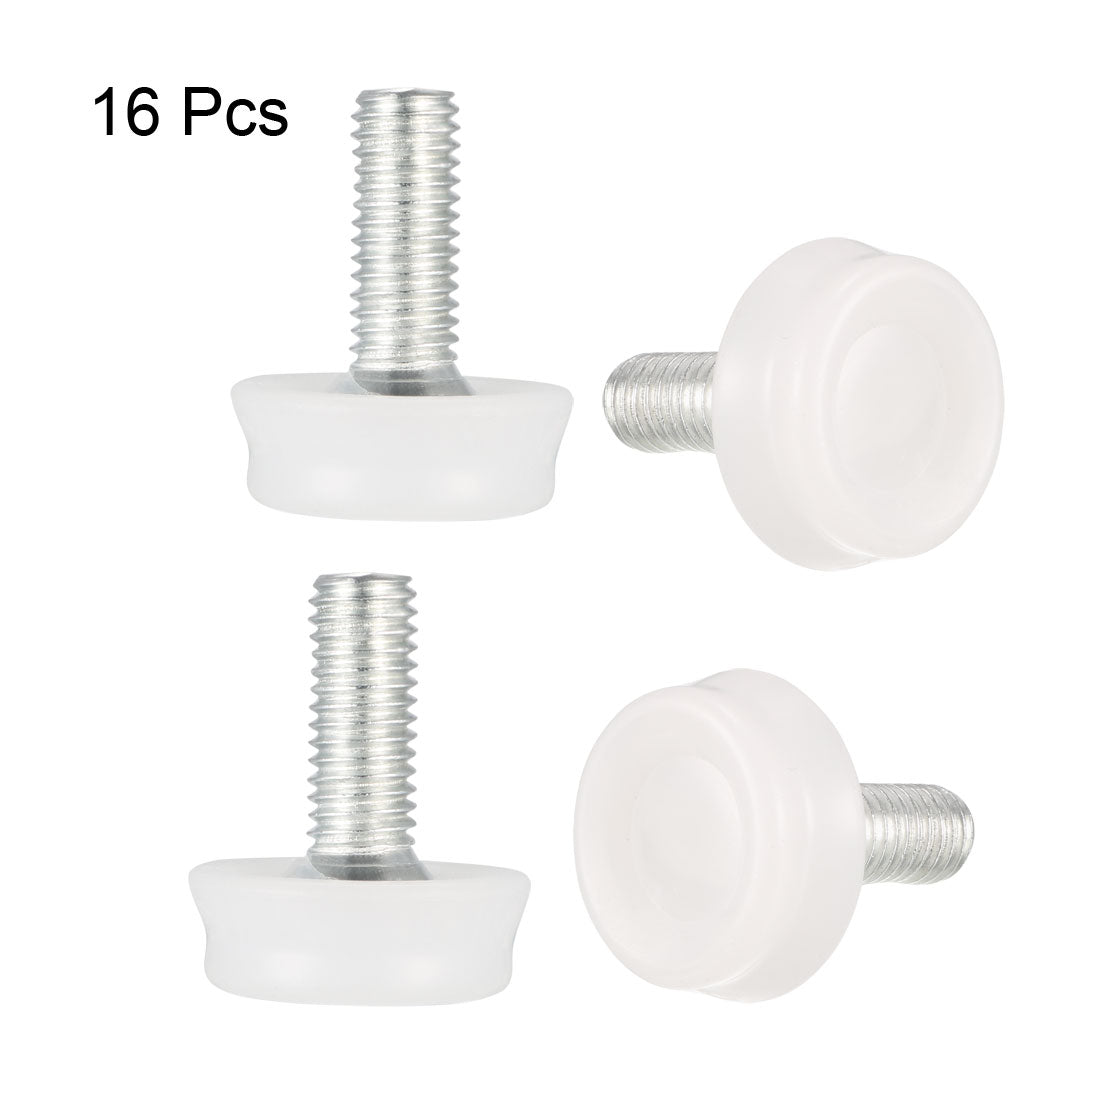 uxcell Uxcell Furniture Levelers, 9mm to 19mm Adjustable Height M8 x 20mm Threaded, 16Pcs